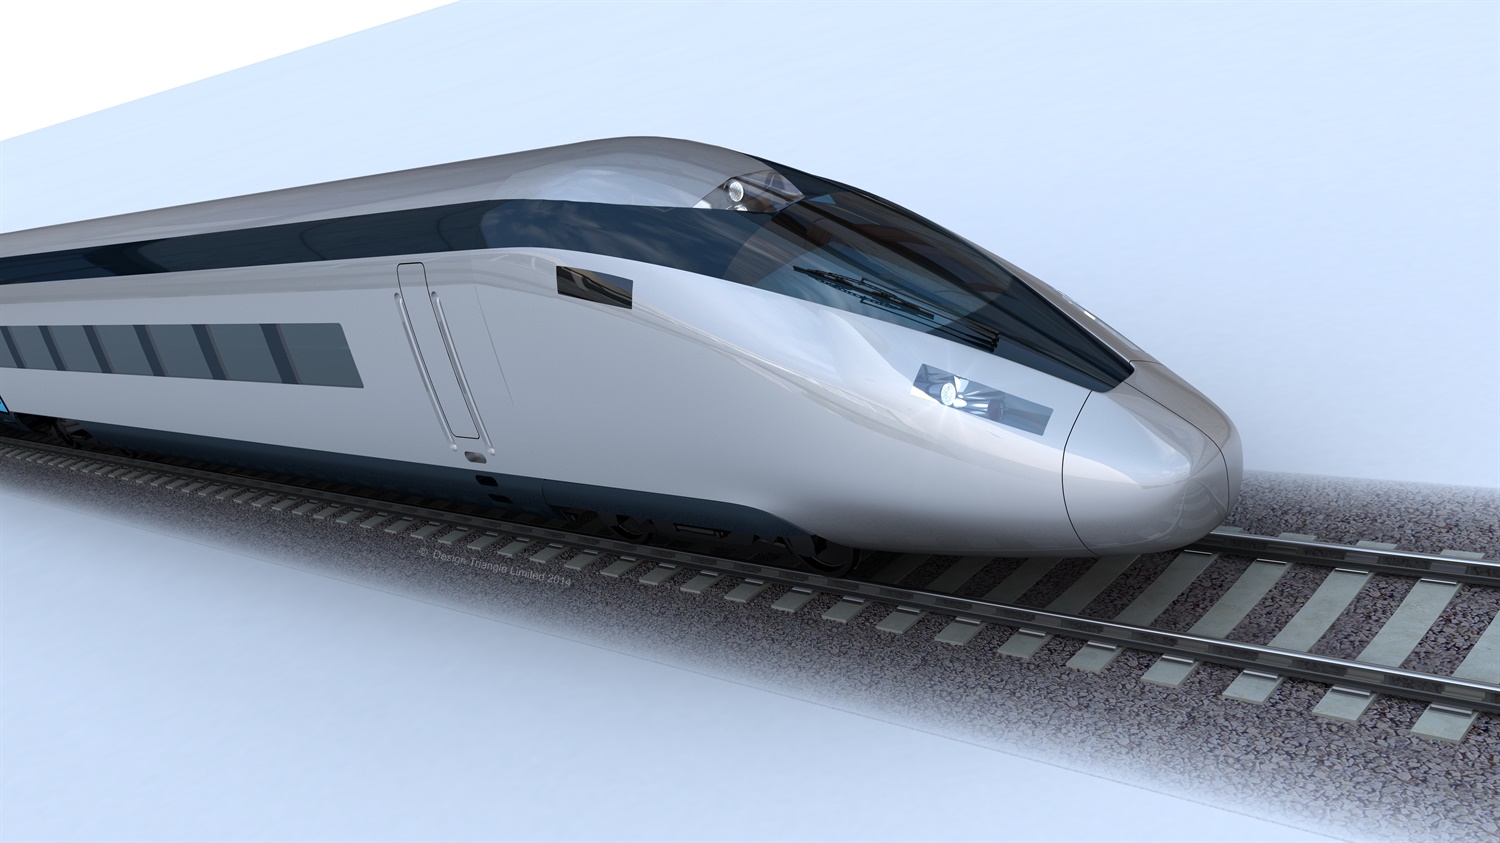 HS2 announce 2016 roadshows for potential suppliers